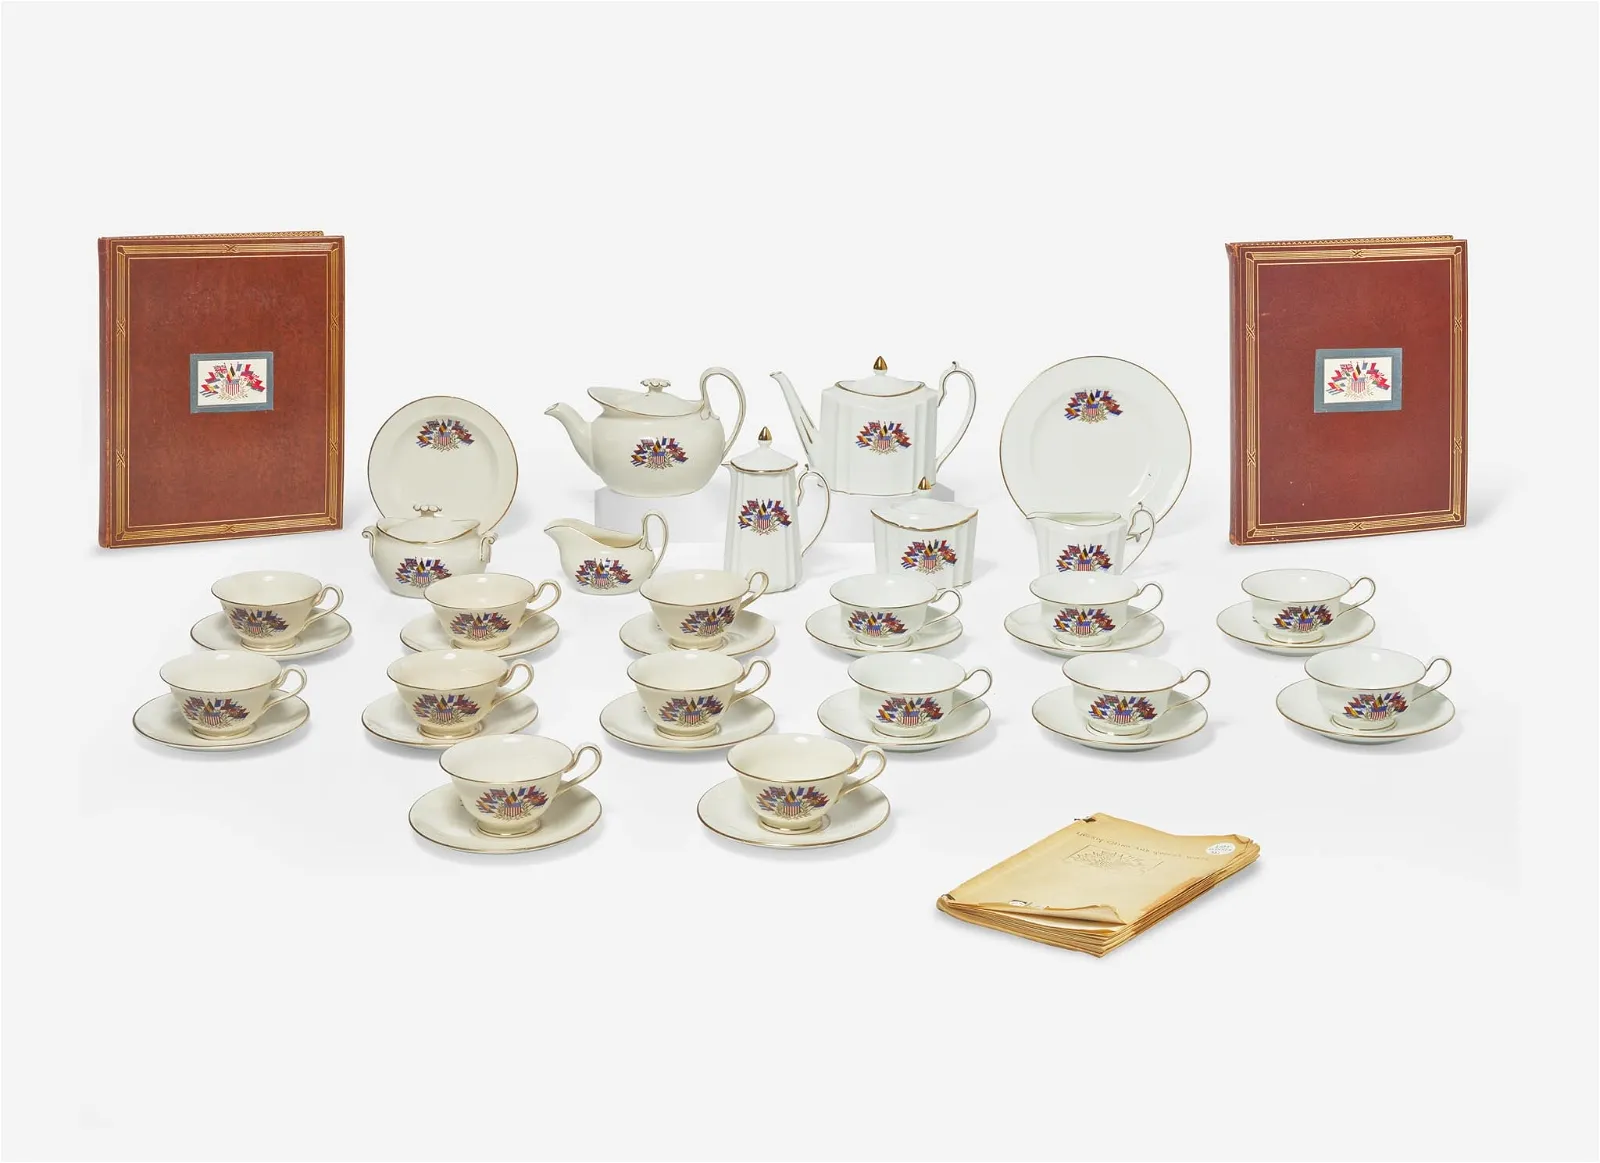 Wedgwood Liberty Ware archive emerges in third Rubin collection sale at Freeman&#8217;s Jan. 25